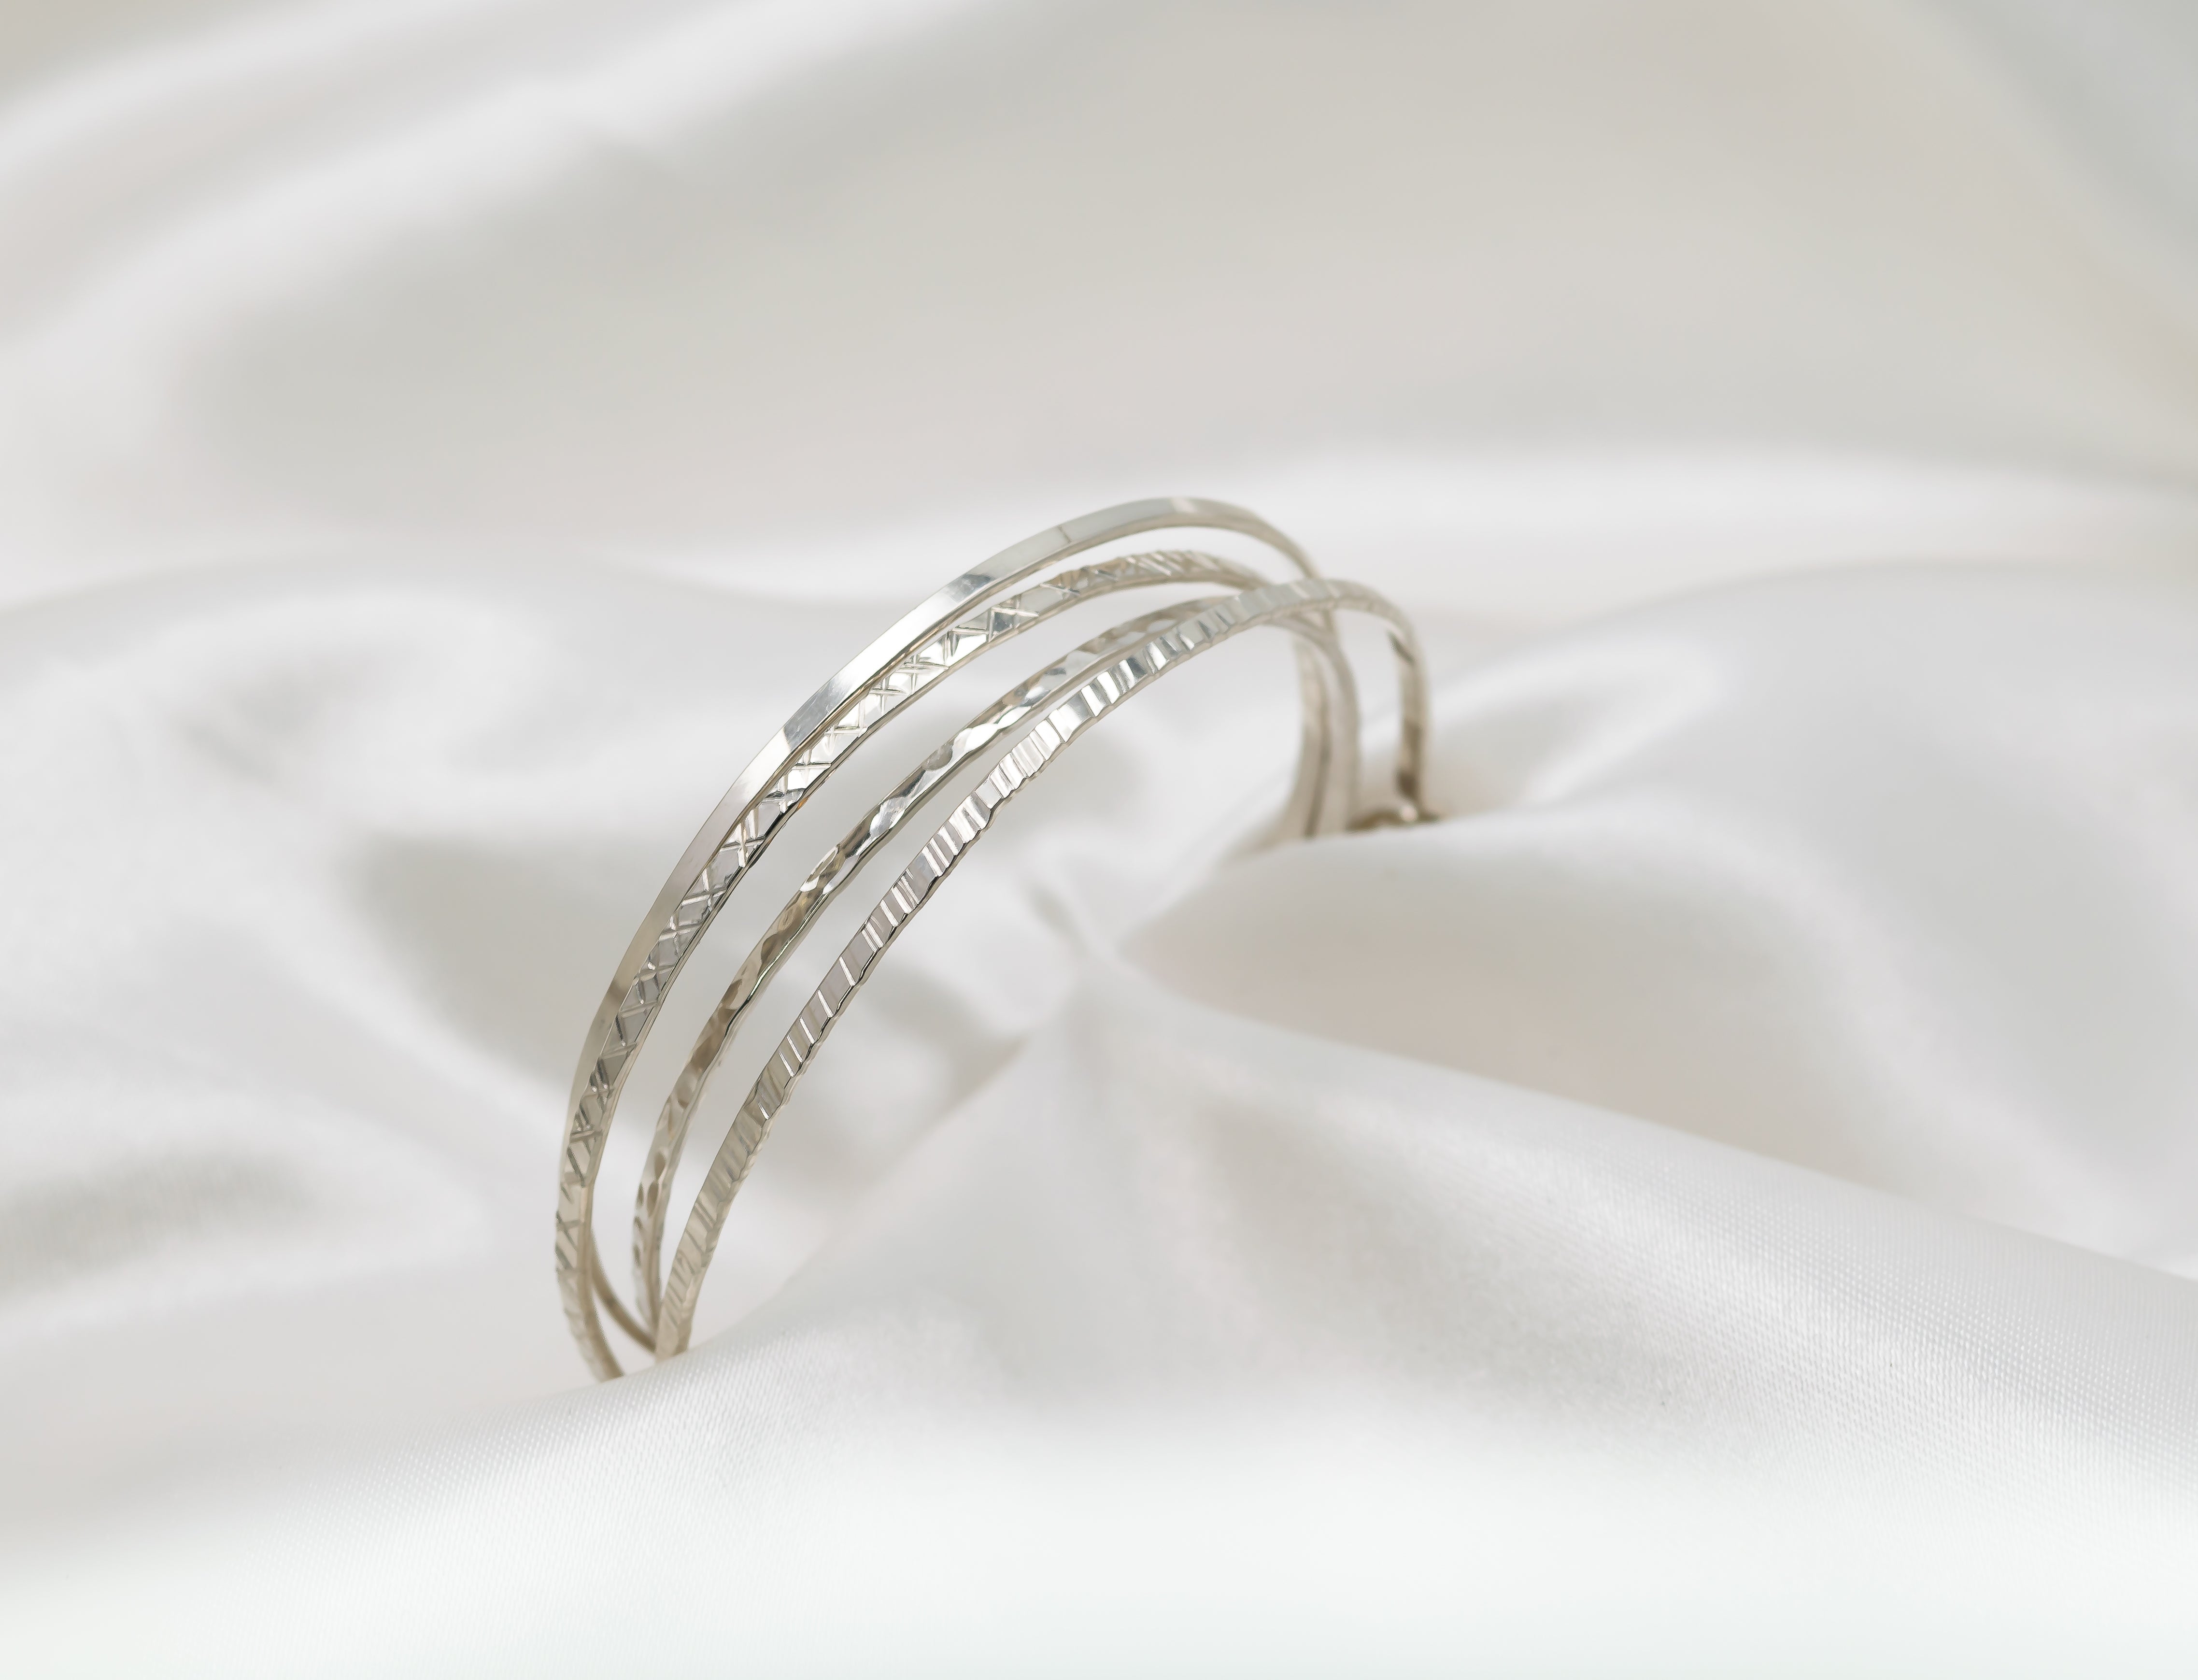 sterling silver stacking bangles with different textures